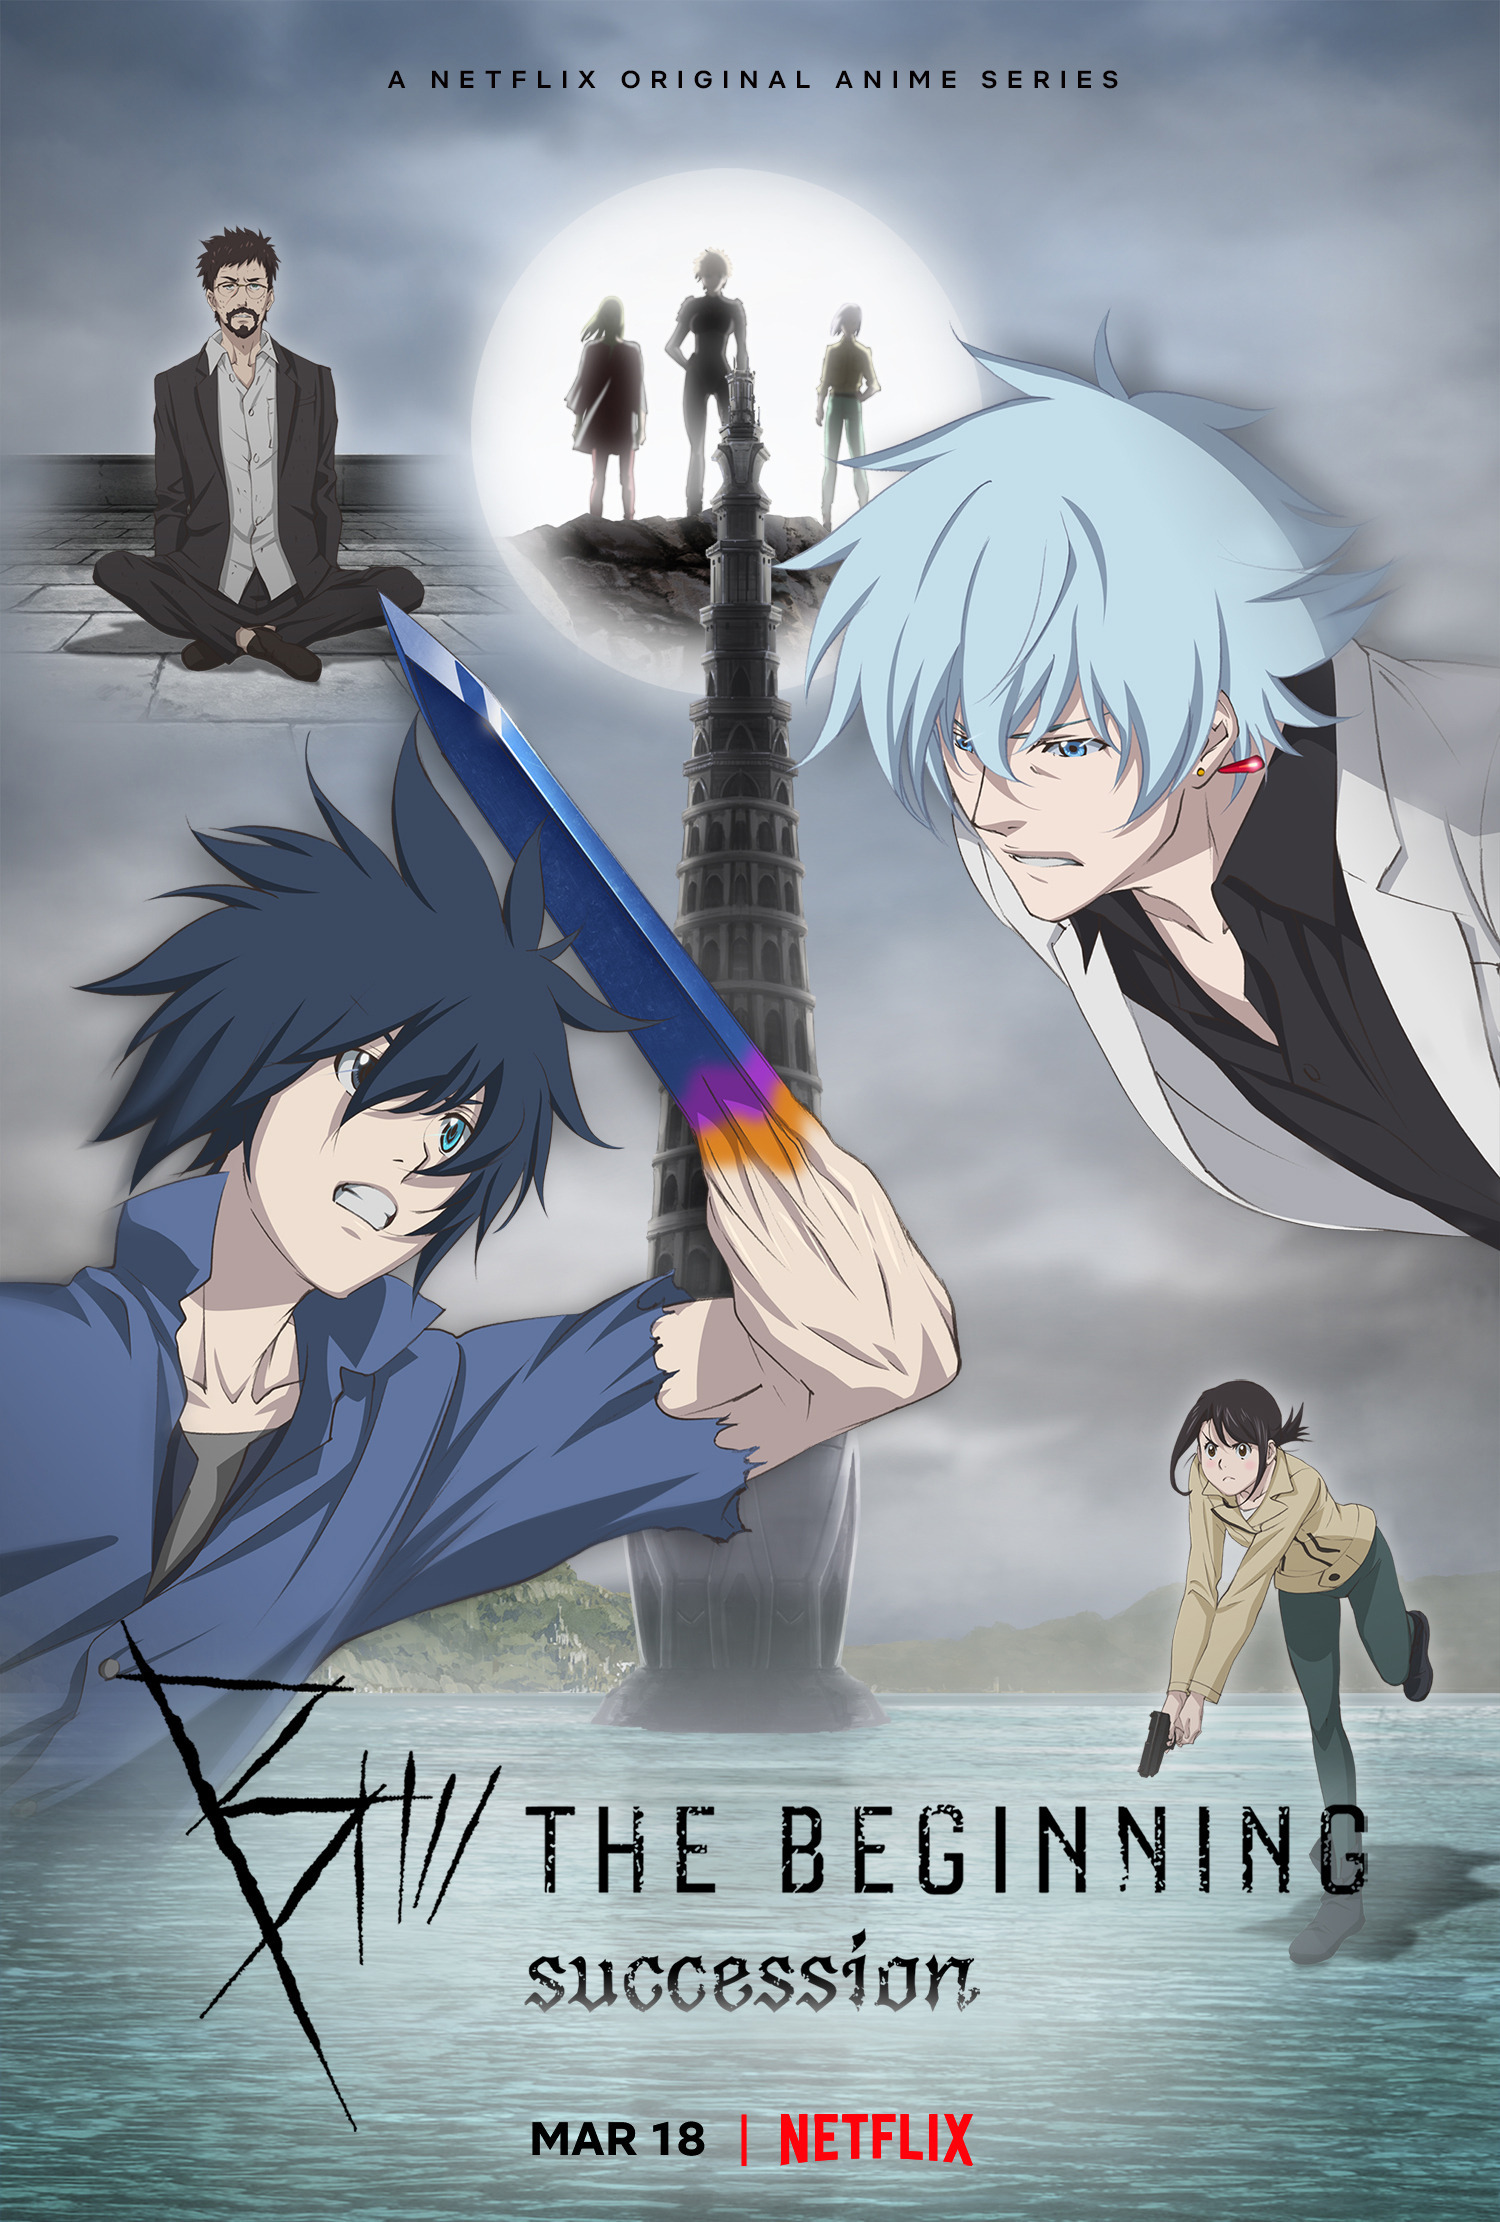 Netflixs B The Beginning Packs Anime Action but The Story Never Gels